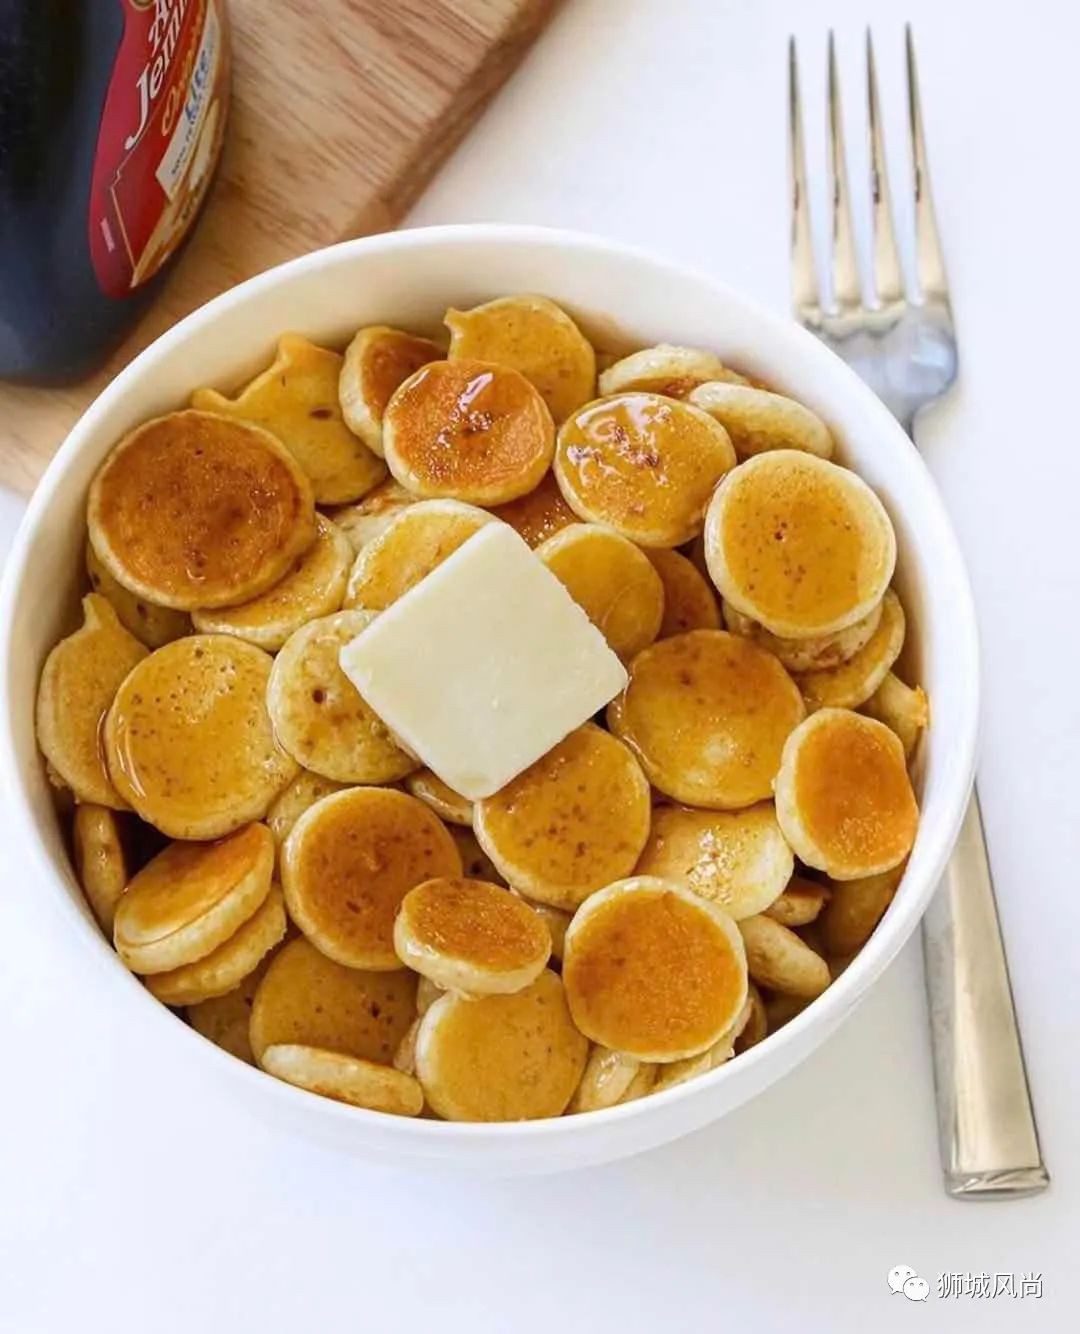 Homemade pancake cereal is the Hot New trend